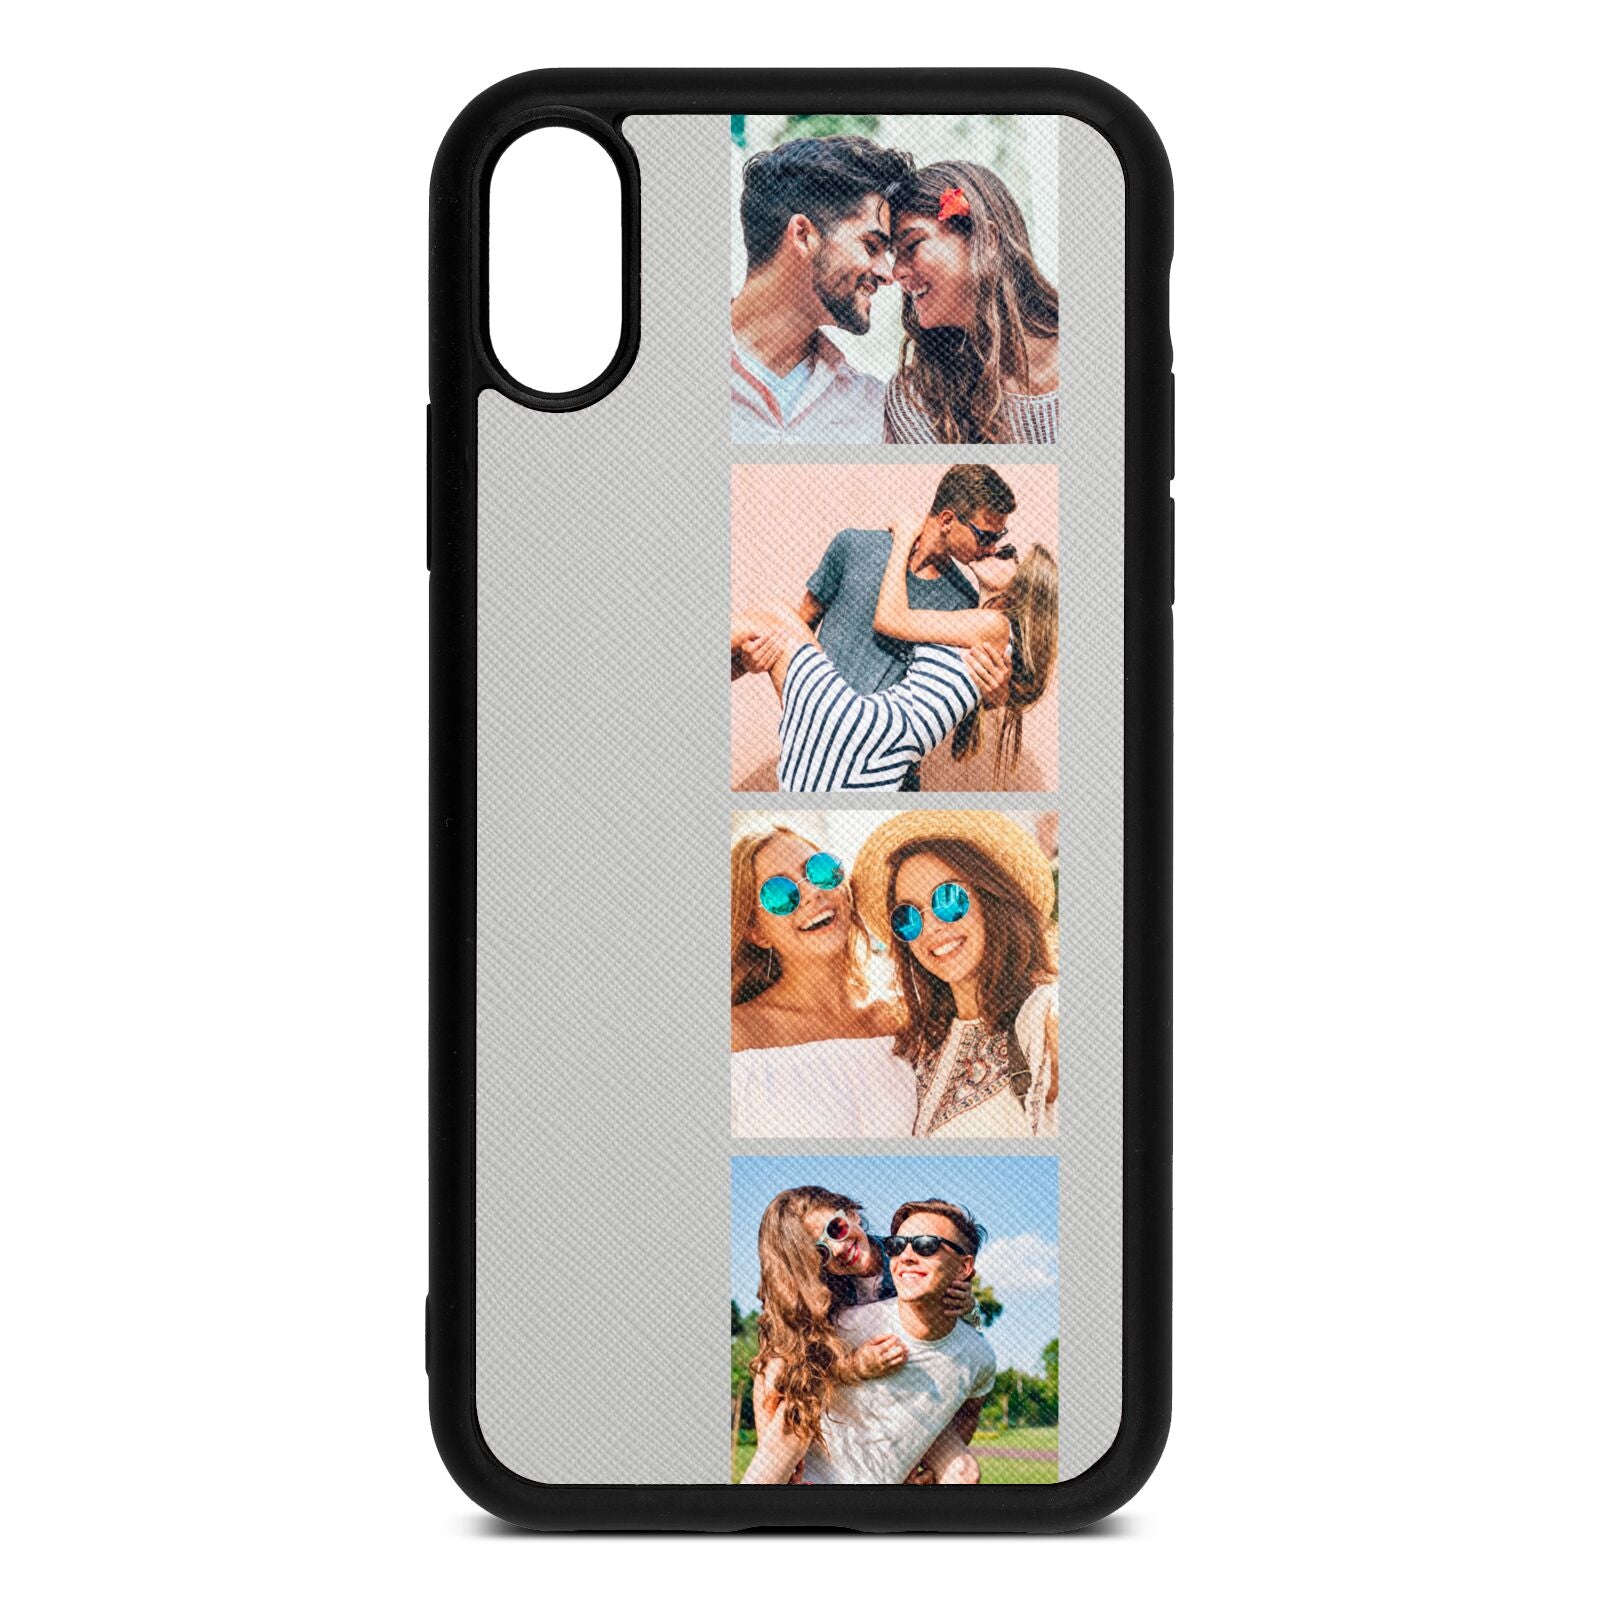 Photo Strip Montage Upload Silver Saffiano Leather iPhone Xr Case